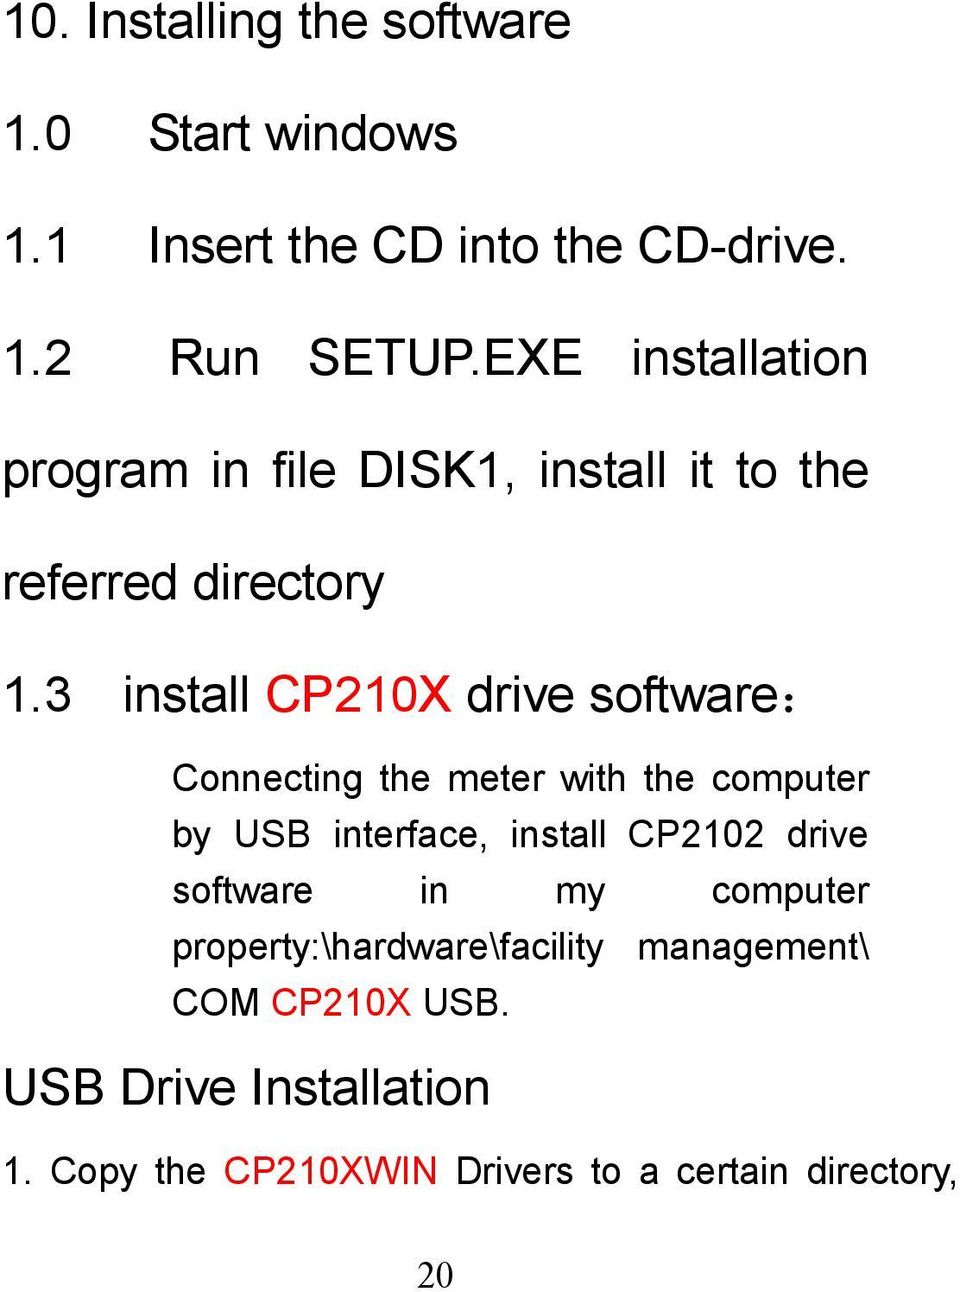 3 install CP210X drive software: Connecting the meter with the computer by USB interface, install CP2102 drive